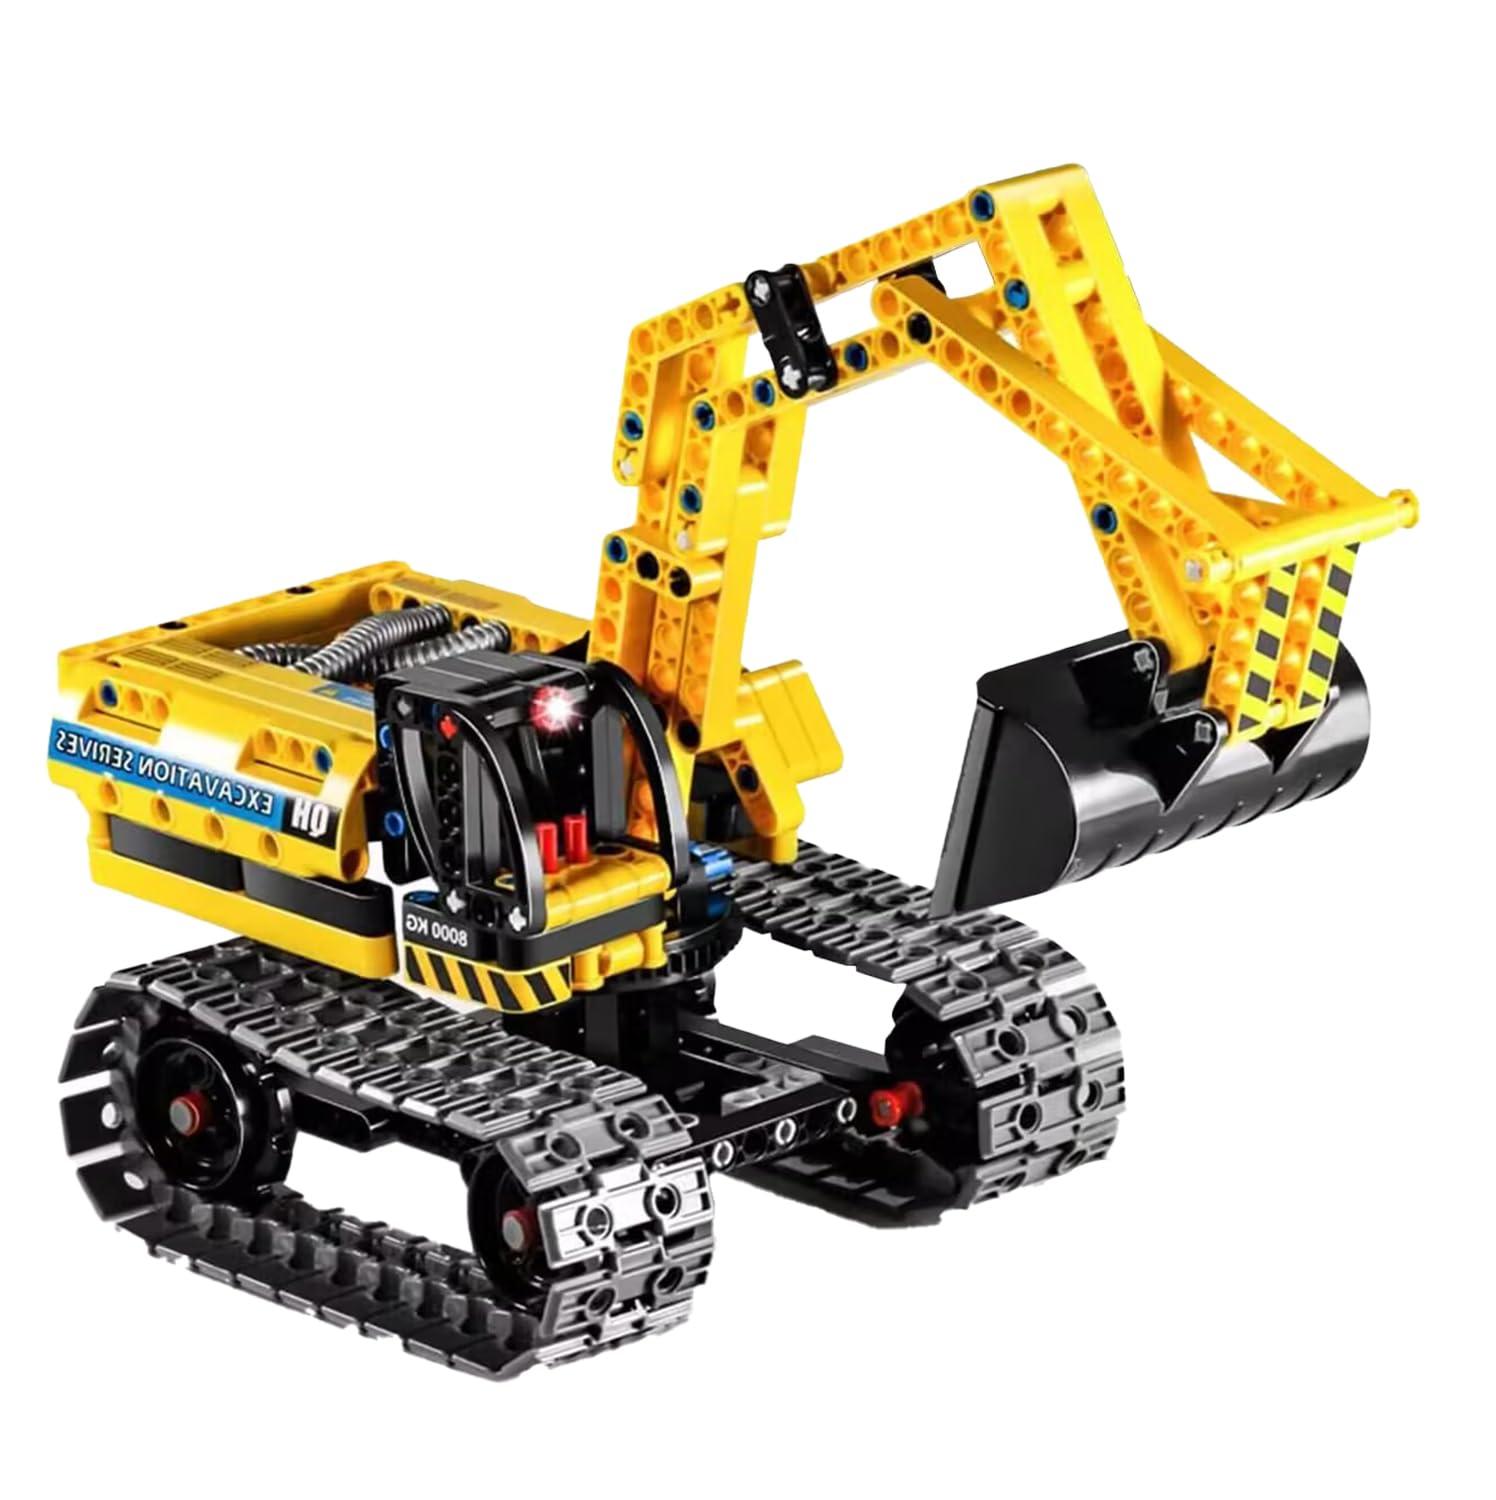 OKKIDY Building Toys Sets Excavators Robot 2-in-1, Technic Building Blocks, 342 PCS STEM Building Blocks Crane Toy Crawler Excavator & Robot Gift for Children 6 7 8 9 10 Years Old 0